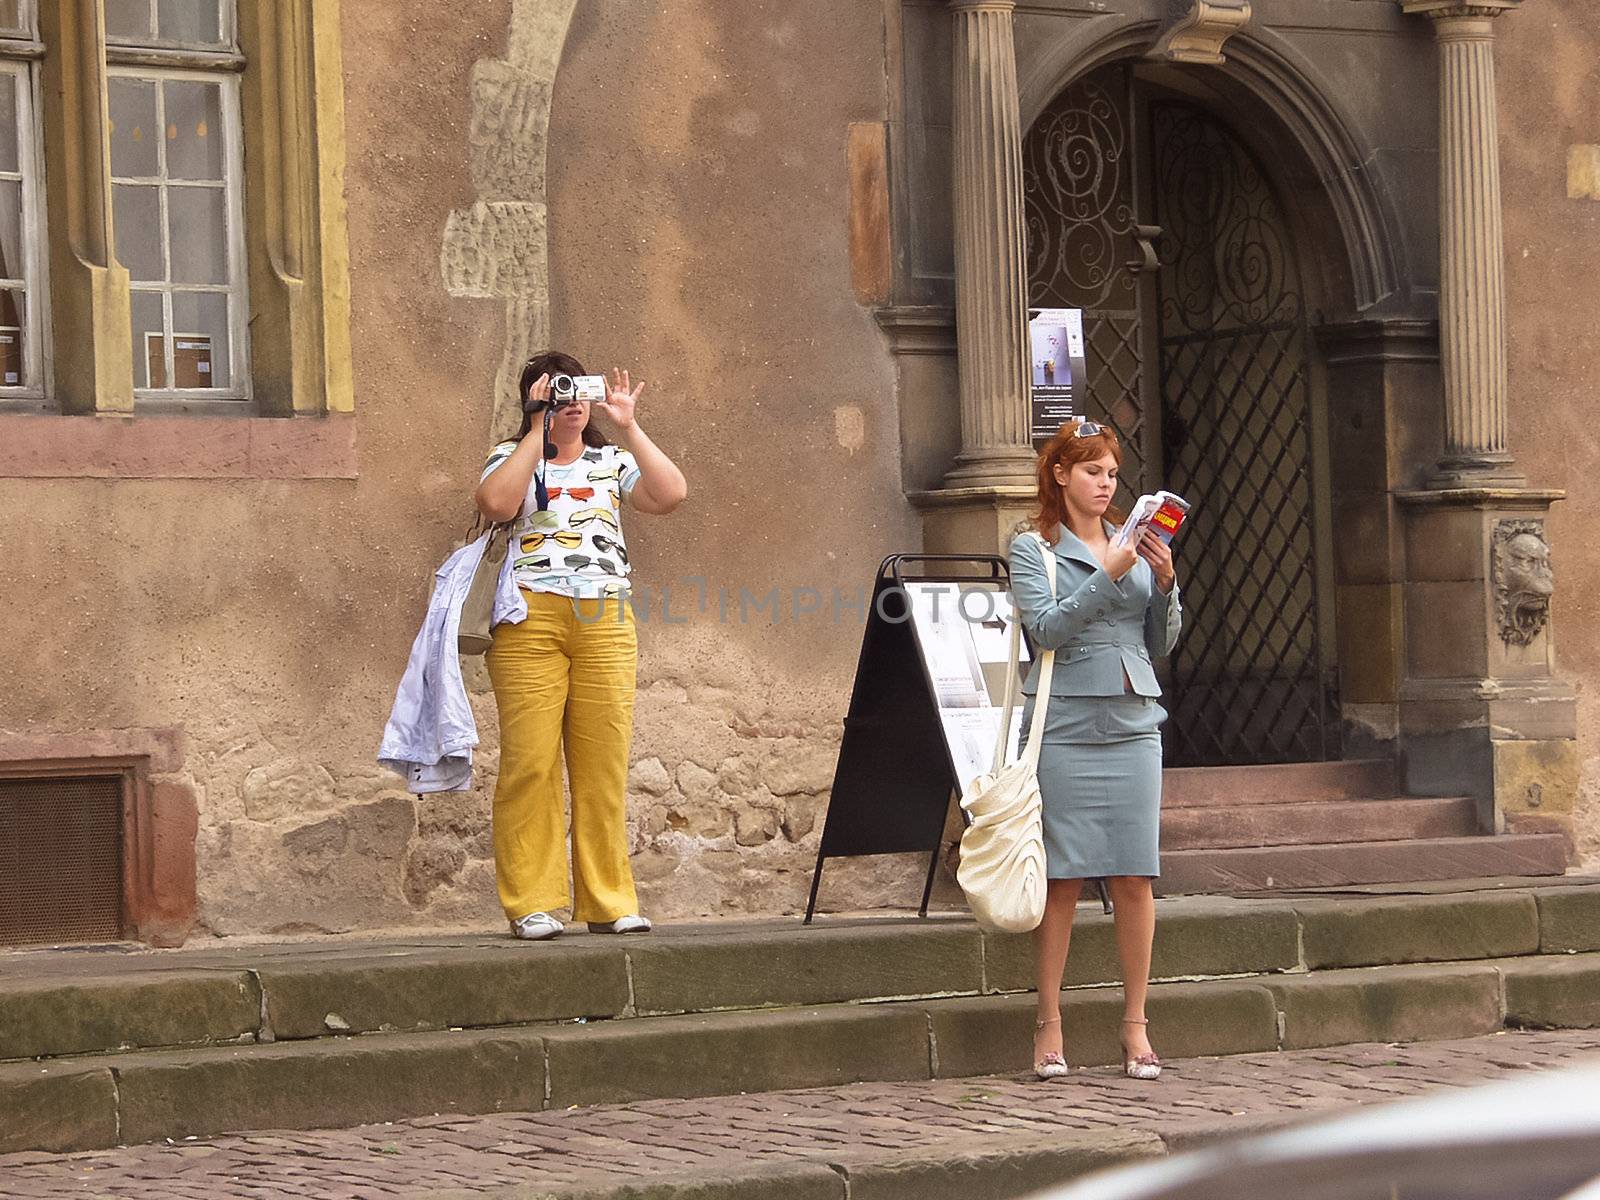 09/14/2007. Colmar. France. Two young women looking at the sight by NickNick